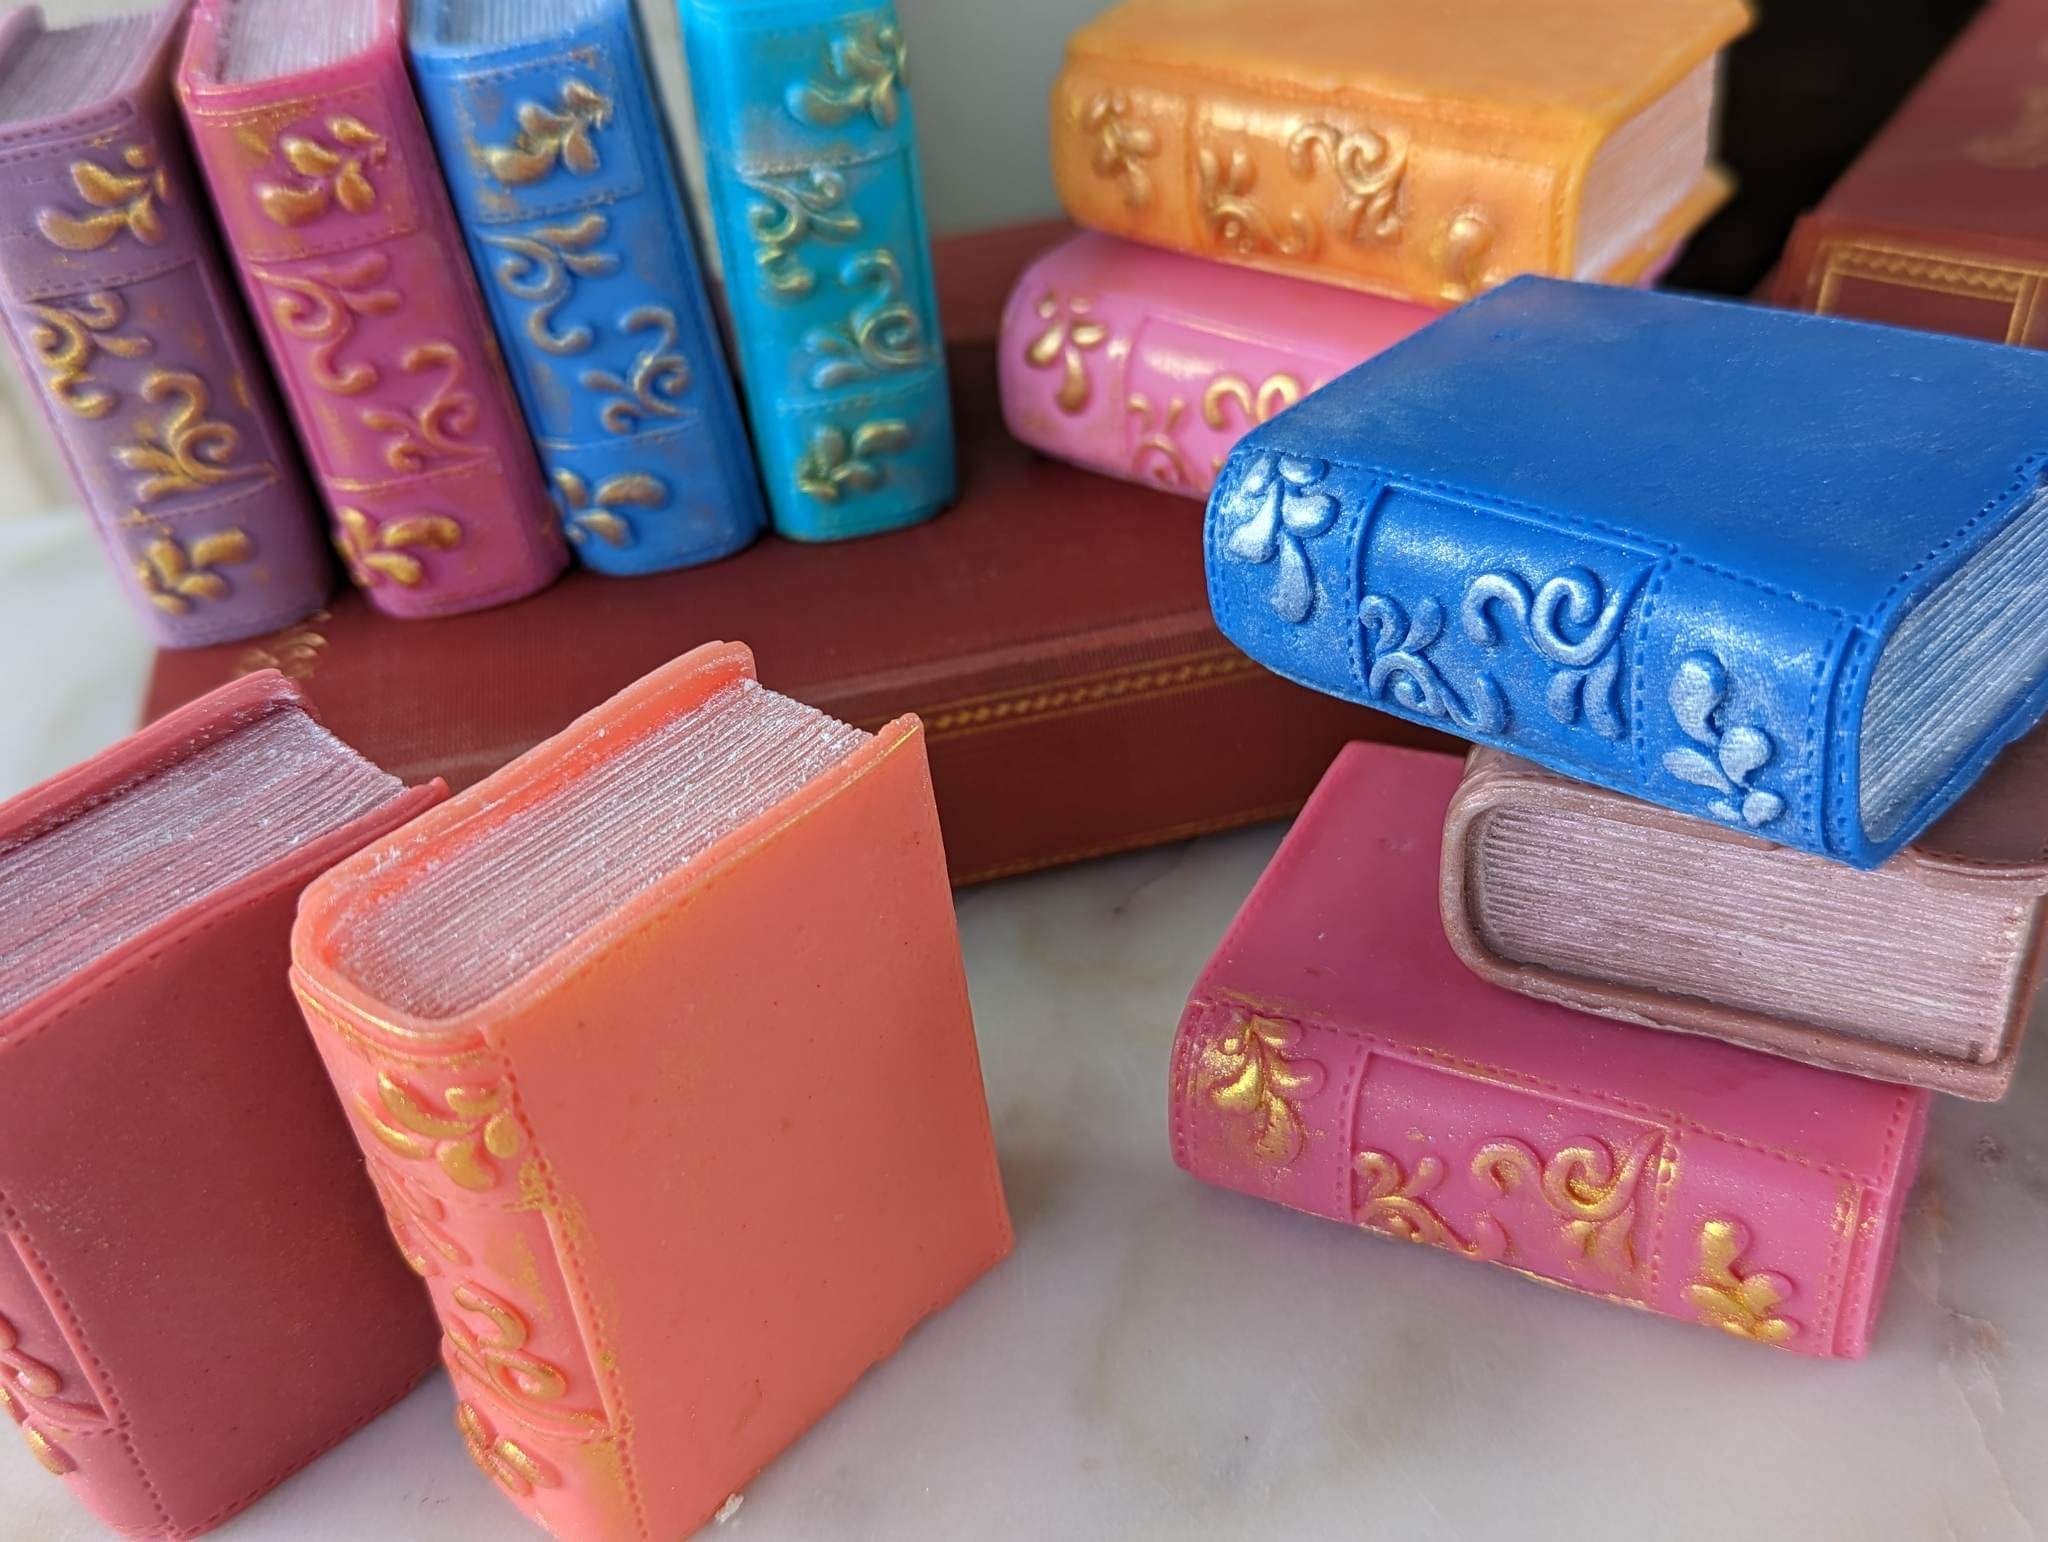 Book Soap, Book club gift, Wedding favor gift, Book Lover gift 1pc.